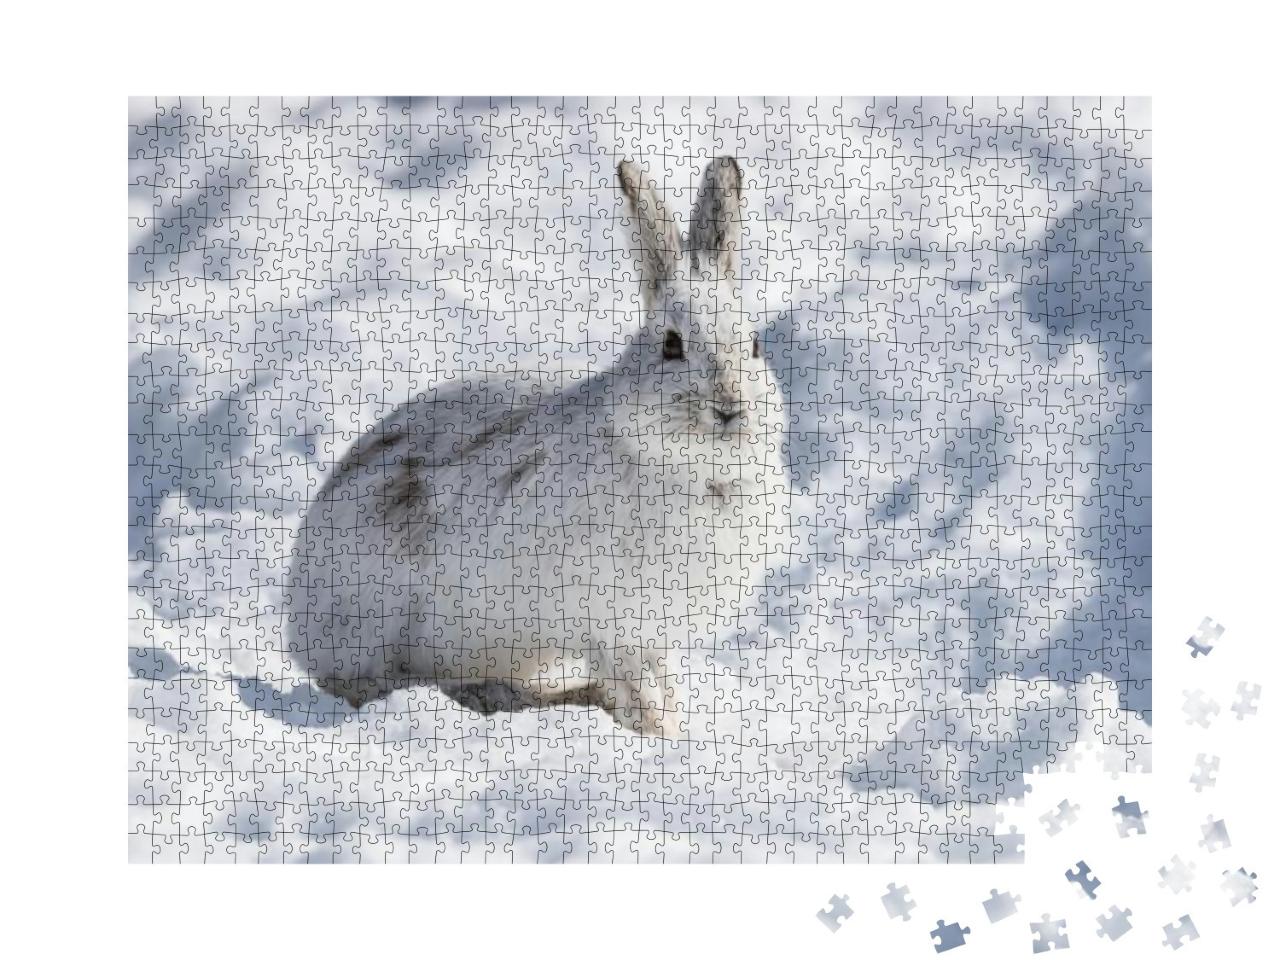 White Snowshoe Hare in Winter... Jigsaw Puzzle with 1000 pieces